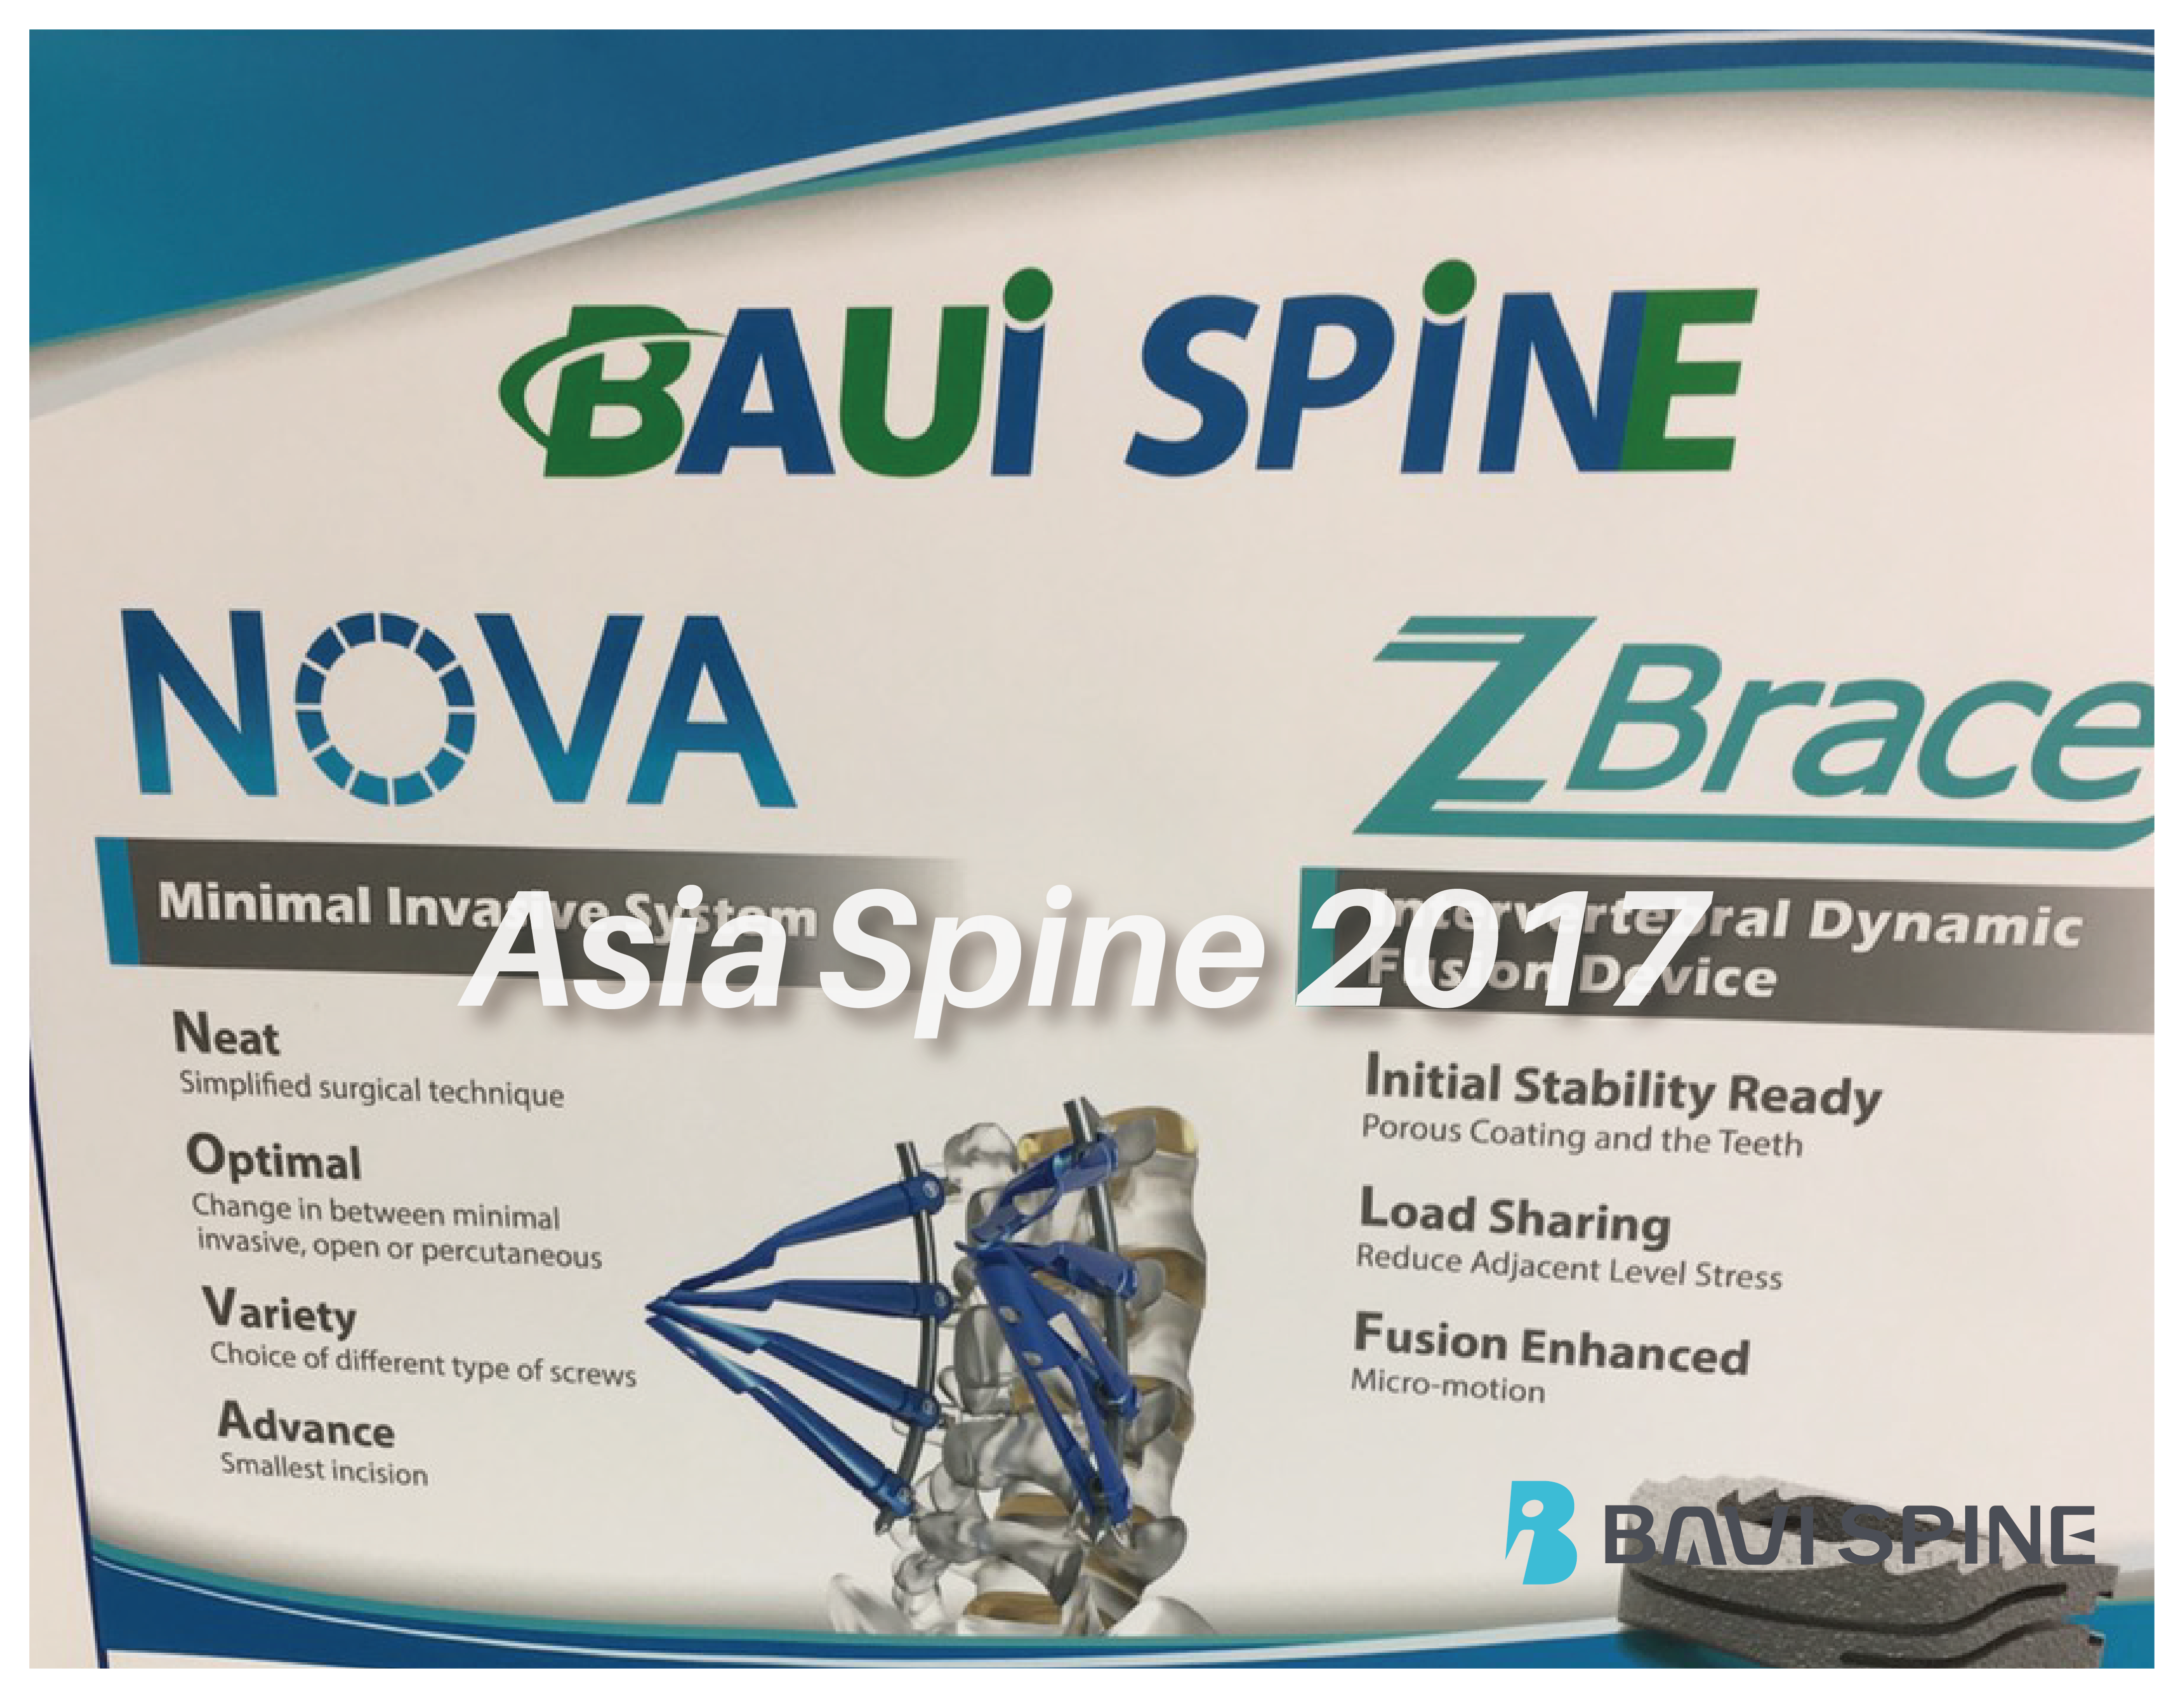 The 8th Annual Meeting of Asia Spine